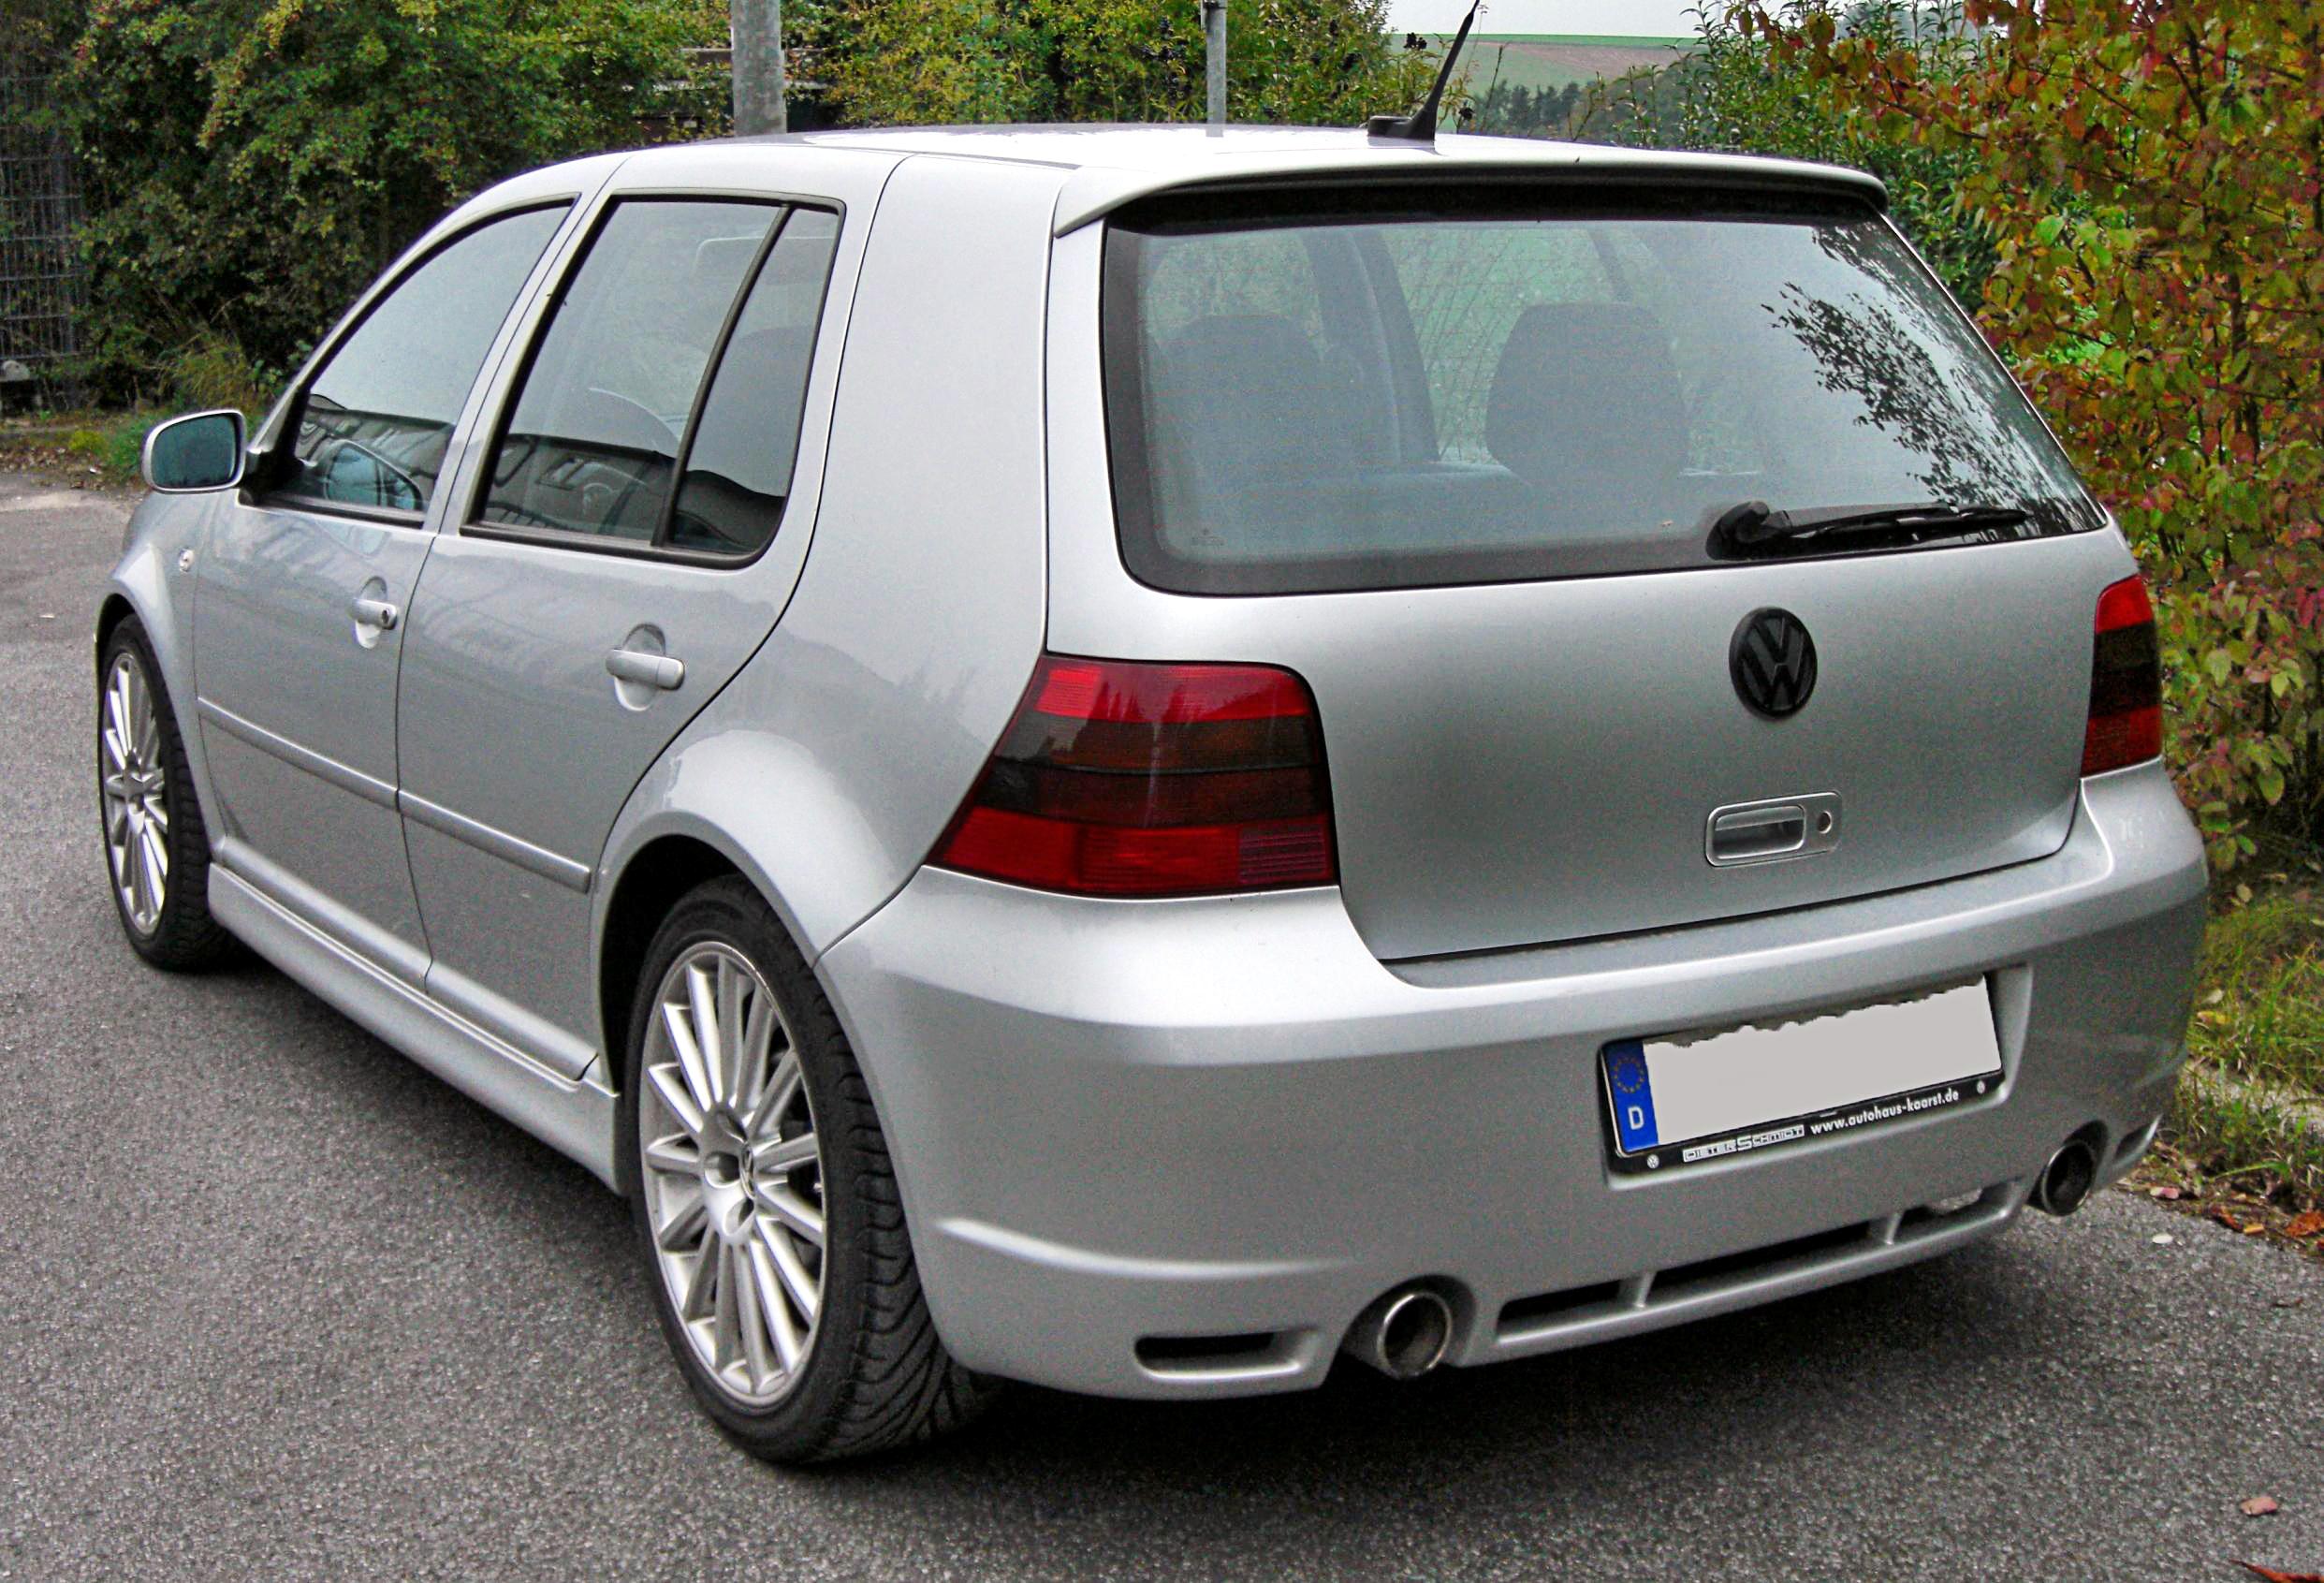 VW Golf 4 R32 technical details, history, photos on Better